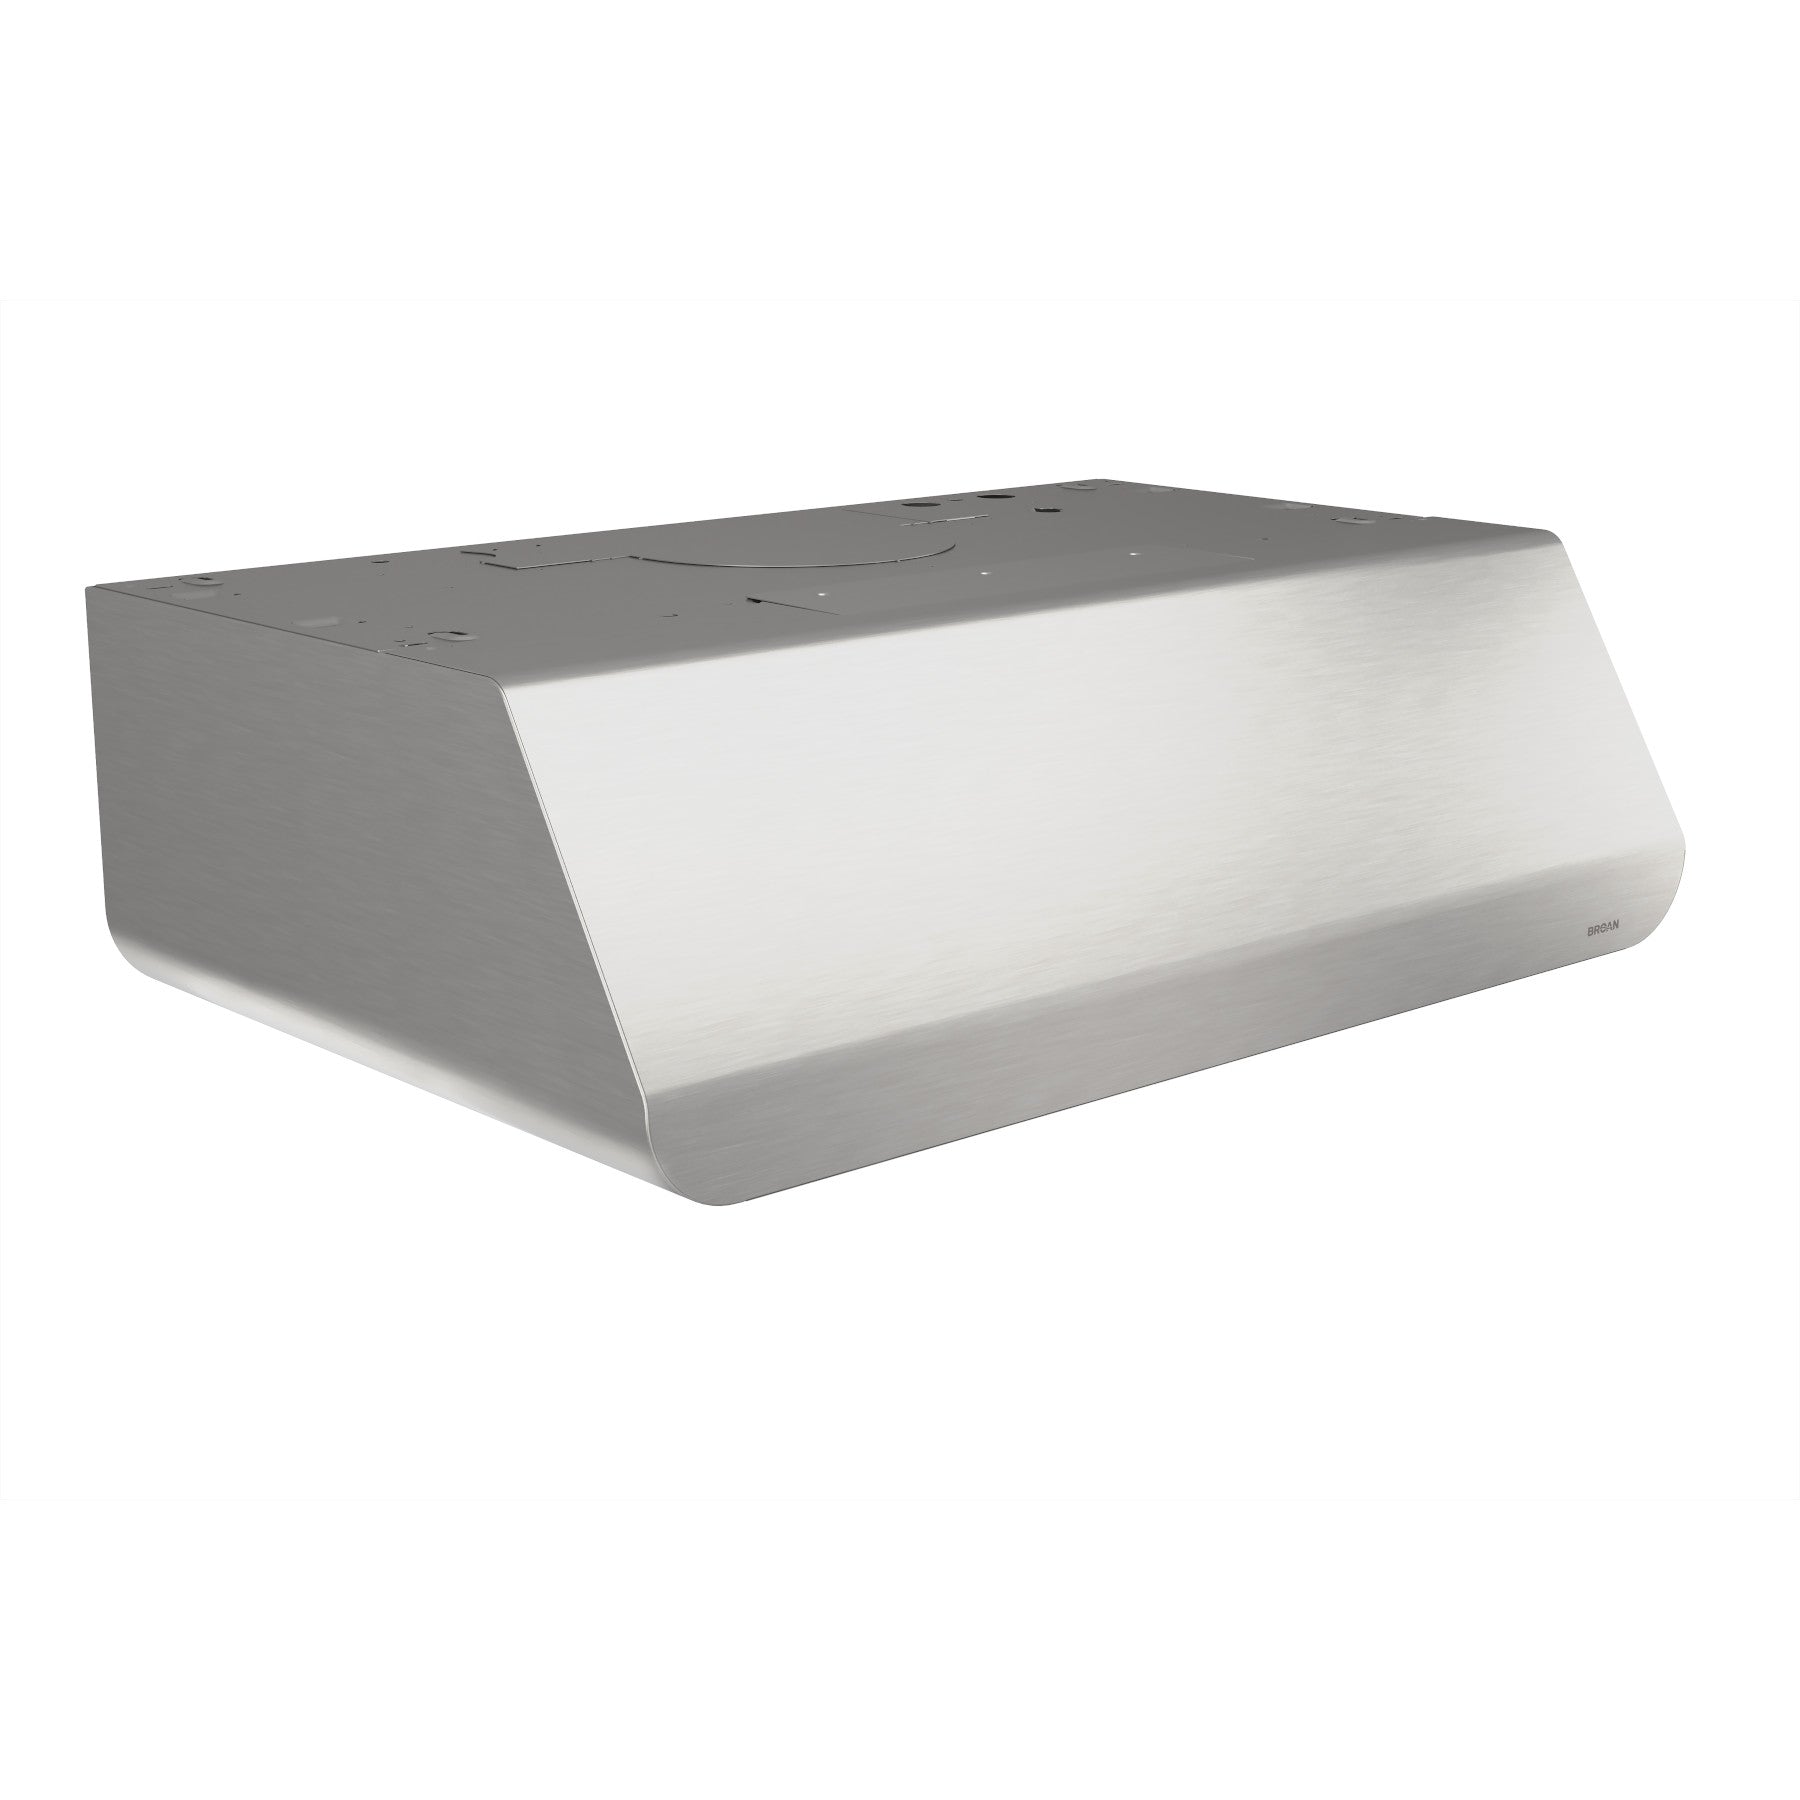 Broan - 30 Inch 400 CFM Under Cabinet Range Vent in Stainless - BPDC130SS